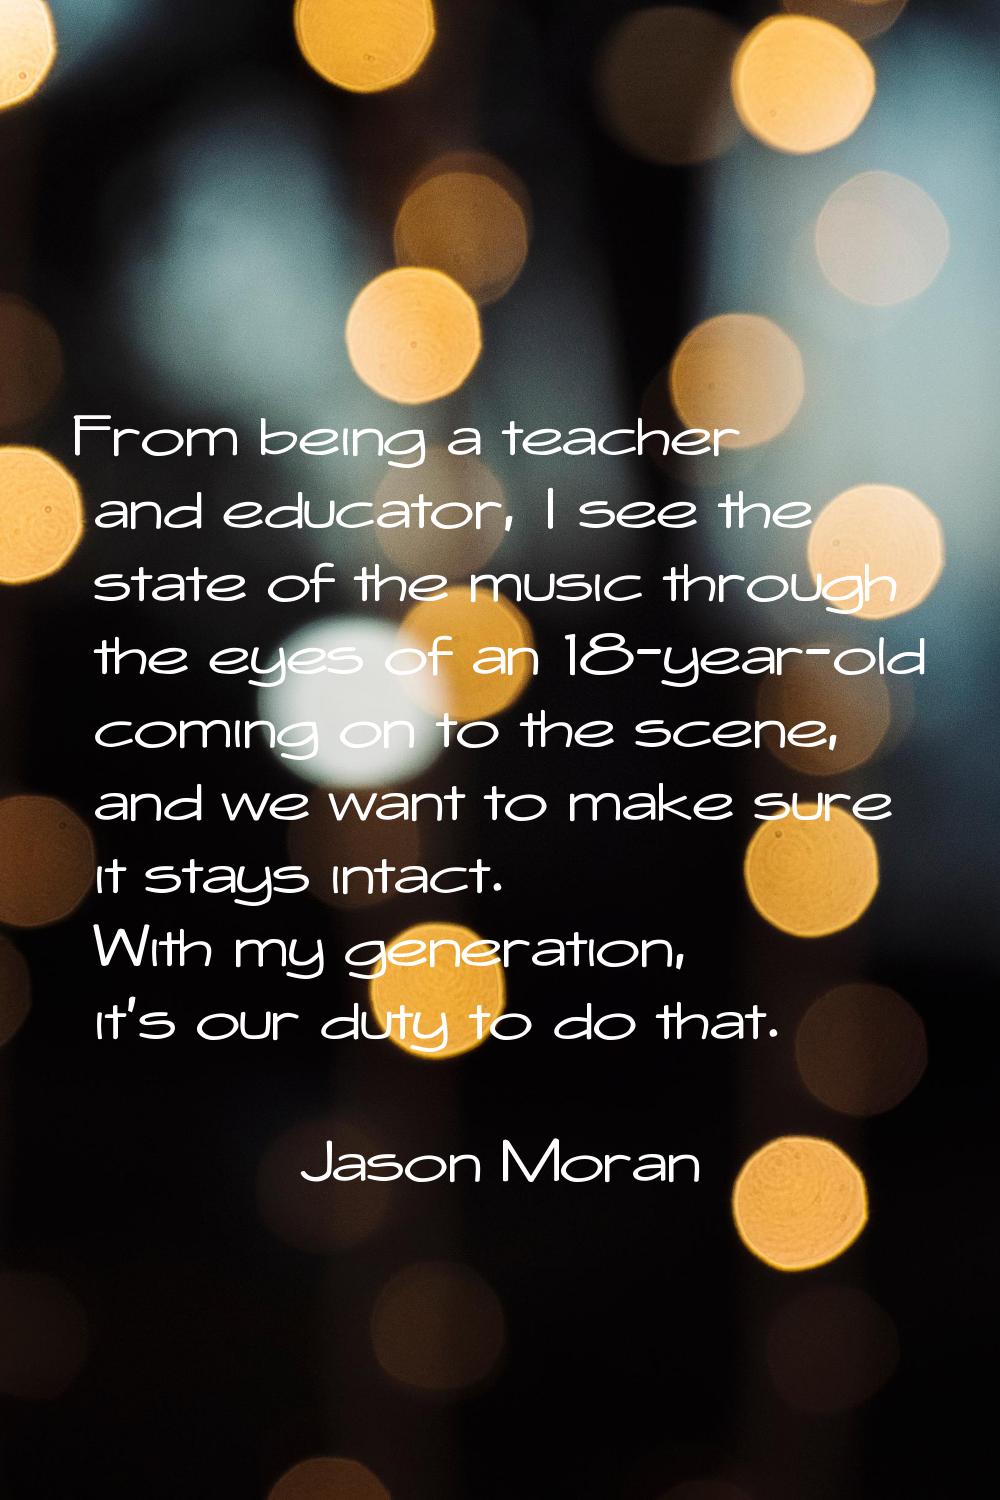 From being a teacher and educator, I see the state of the music through the eyes of an 18-year-old 